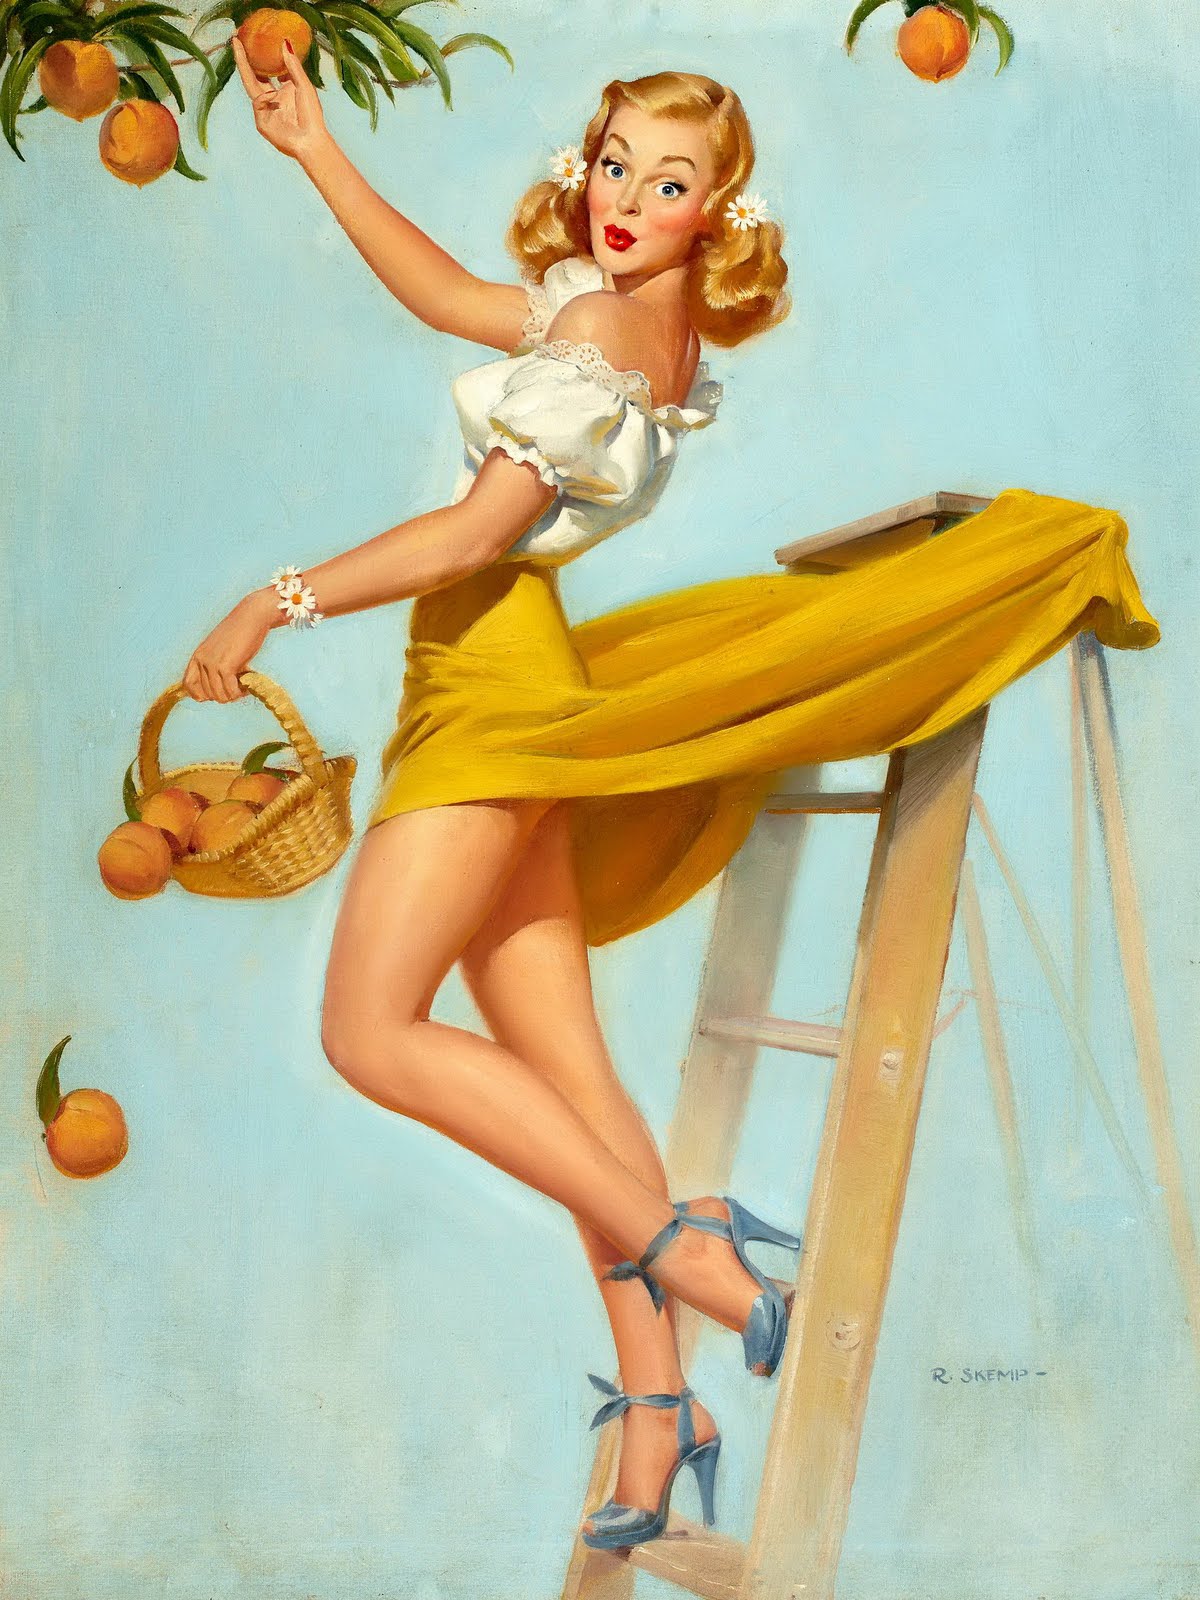 Clasic Pin Up Girls by Robert Oliver Skemp – Pin Up and Cartoon Girls